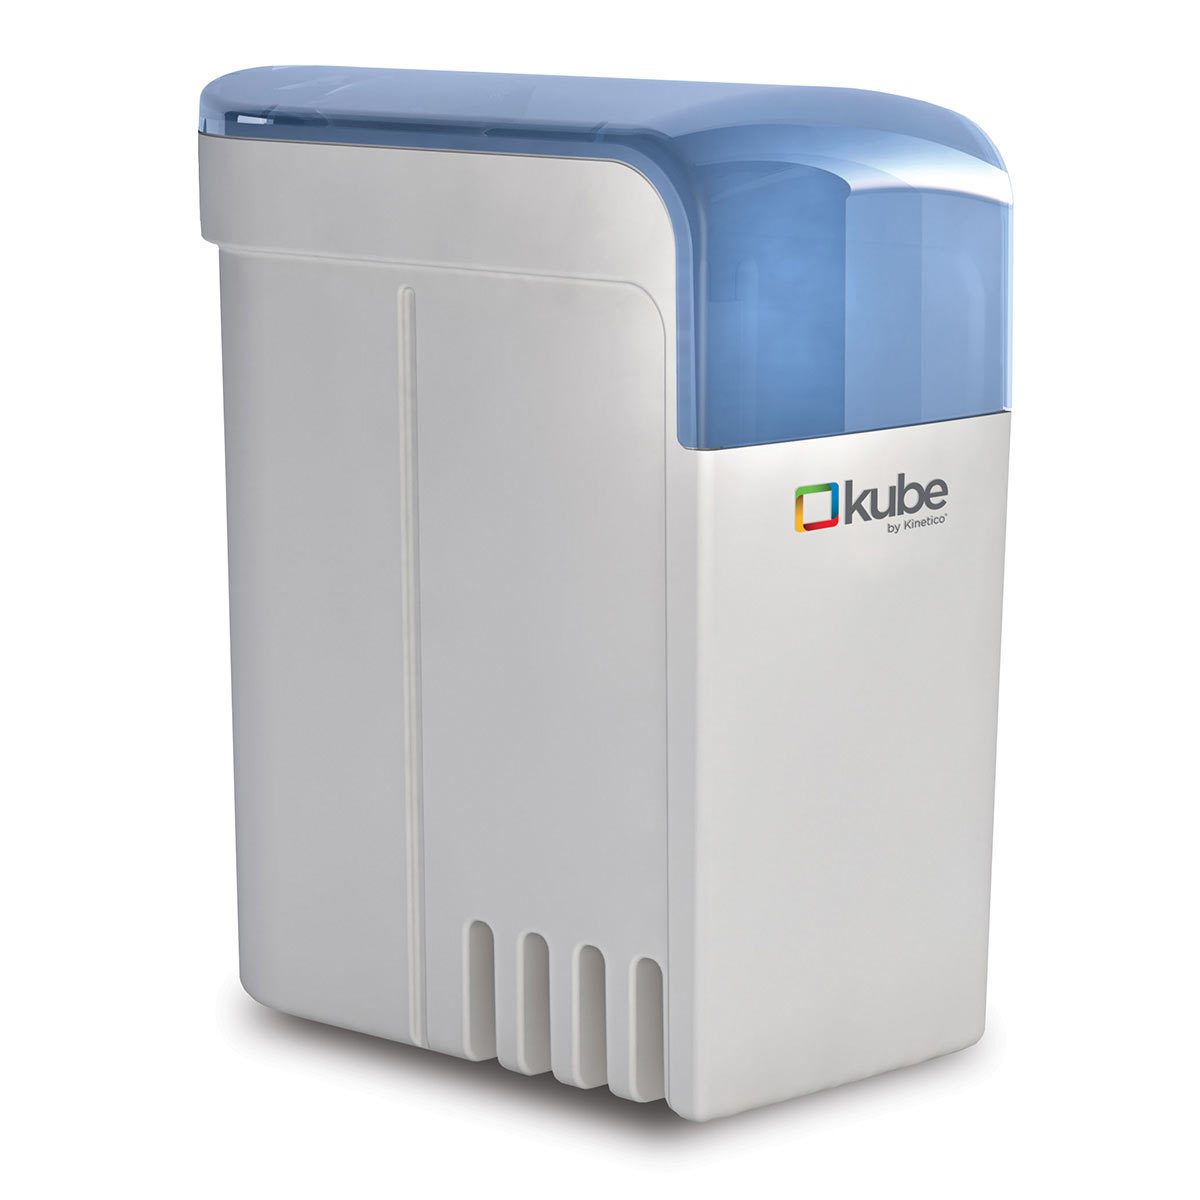 Kinetico Kube 1 Non-Electric Water Softener - For Households with up to 2 Bathrooms - Signature Retail Stores